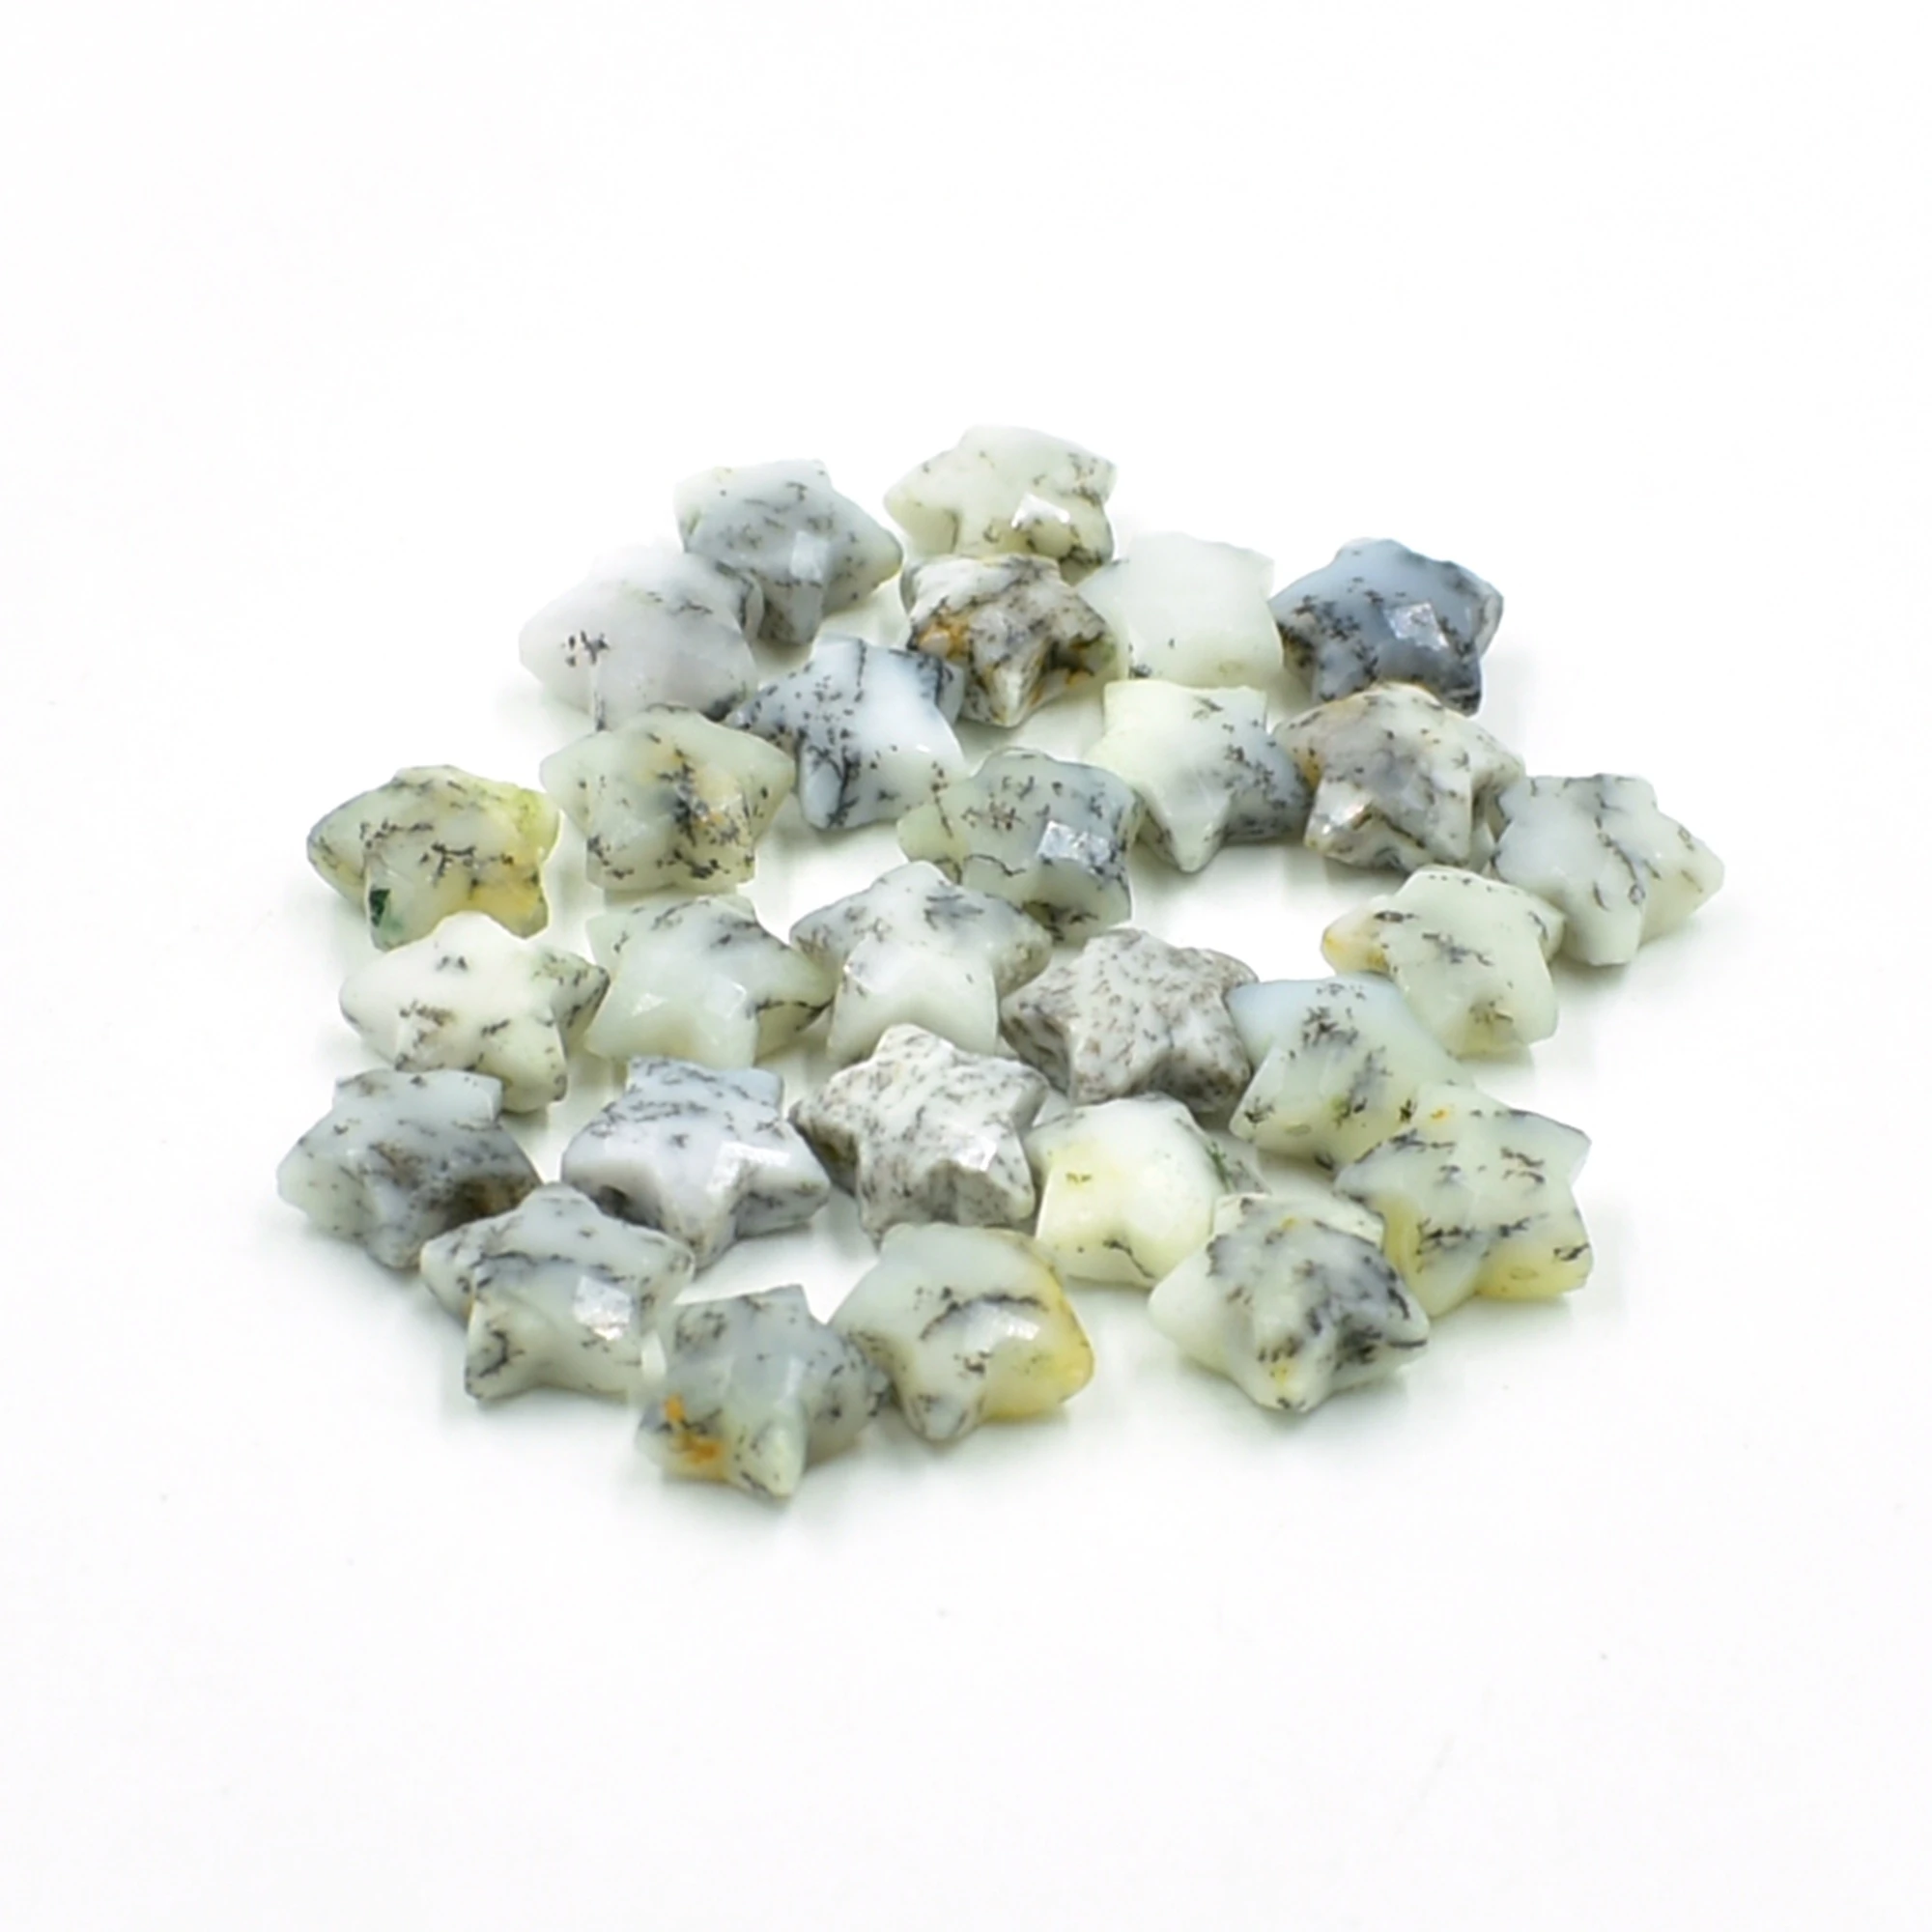 Natural Dendrite Agate Faceted Star Briolette Gemstone, Wholesale Price Gemstone Supplier, Hand Carved Gemstone Jewelry Findings